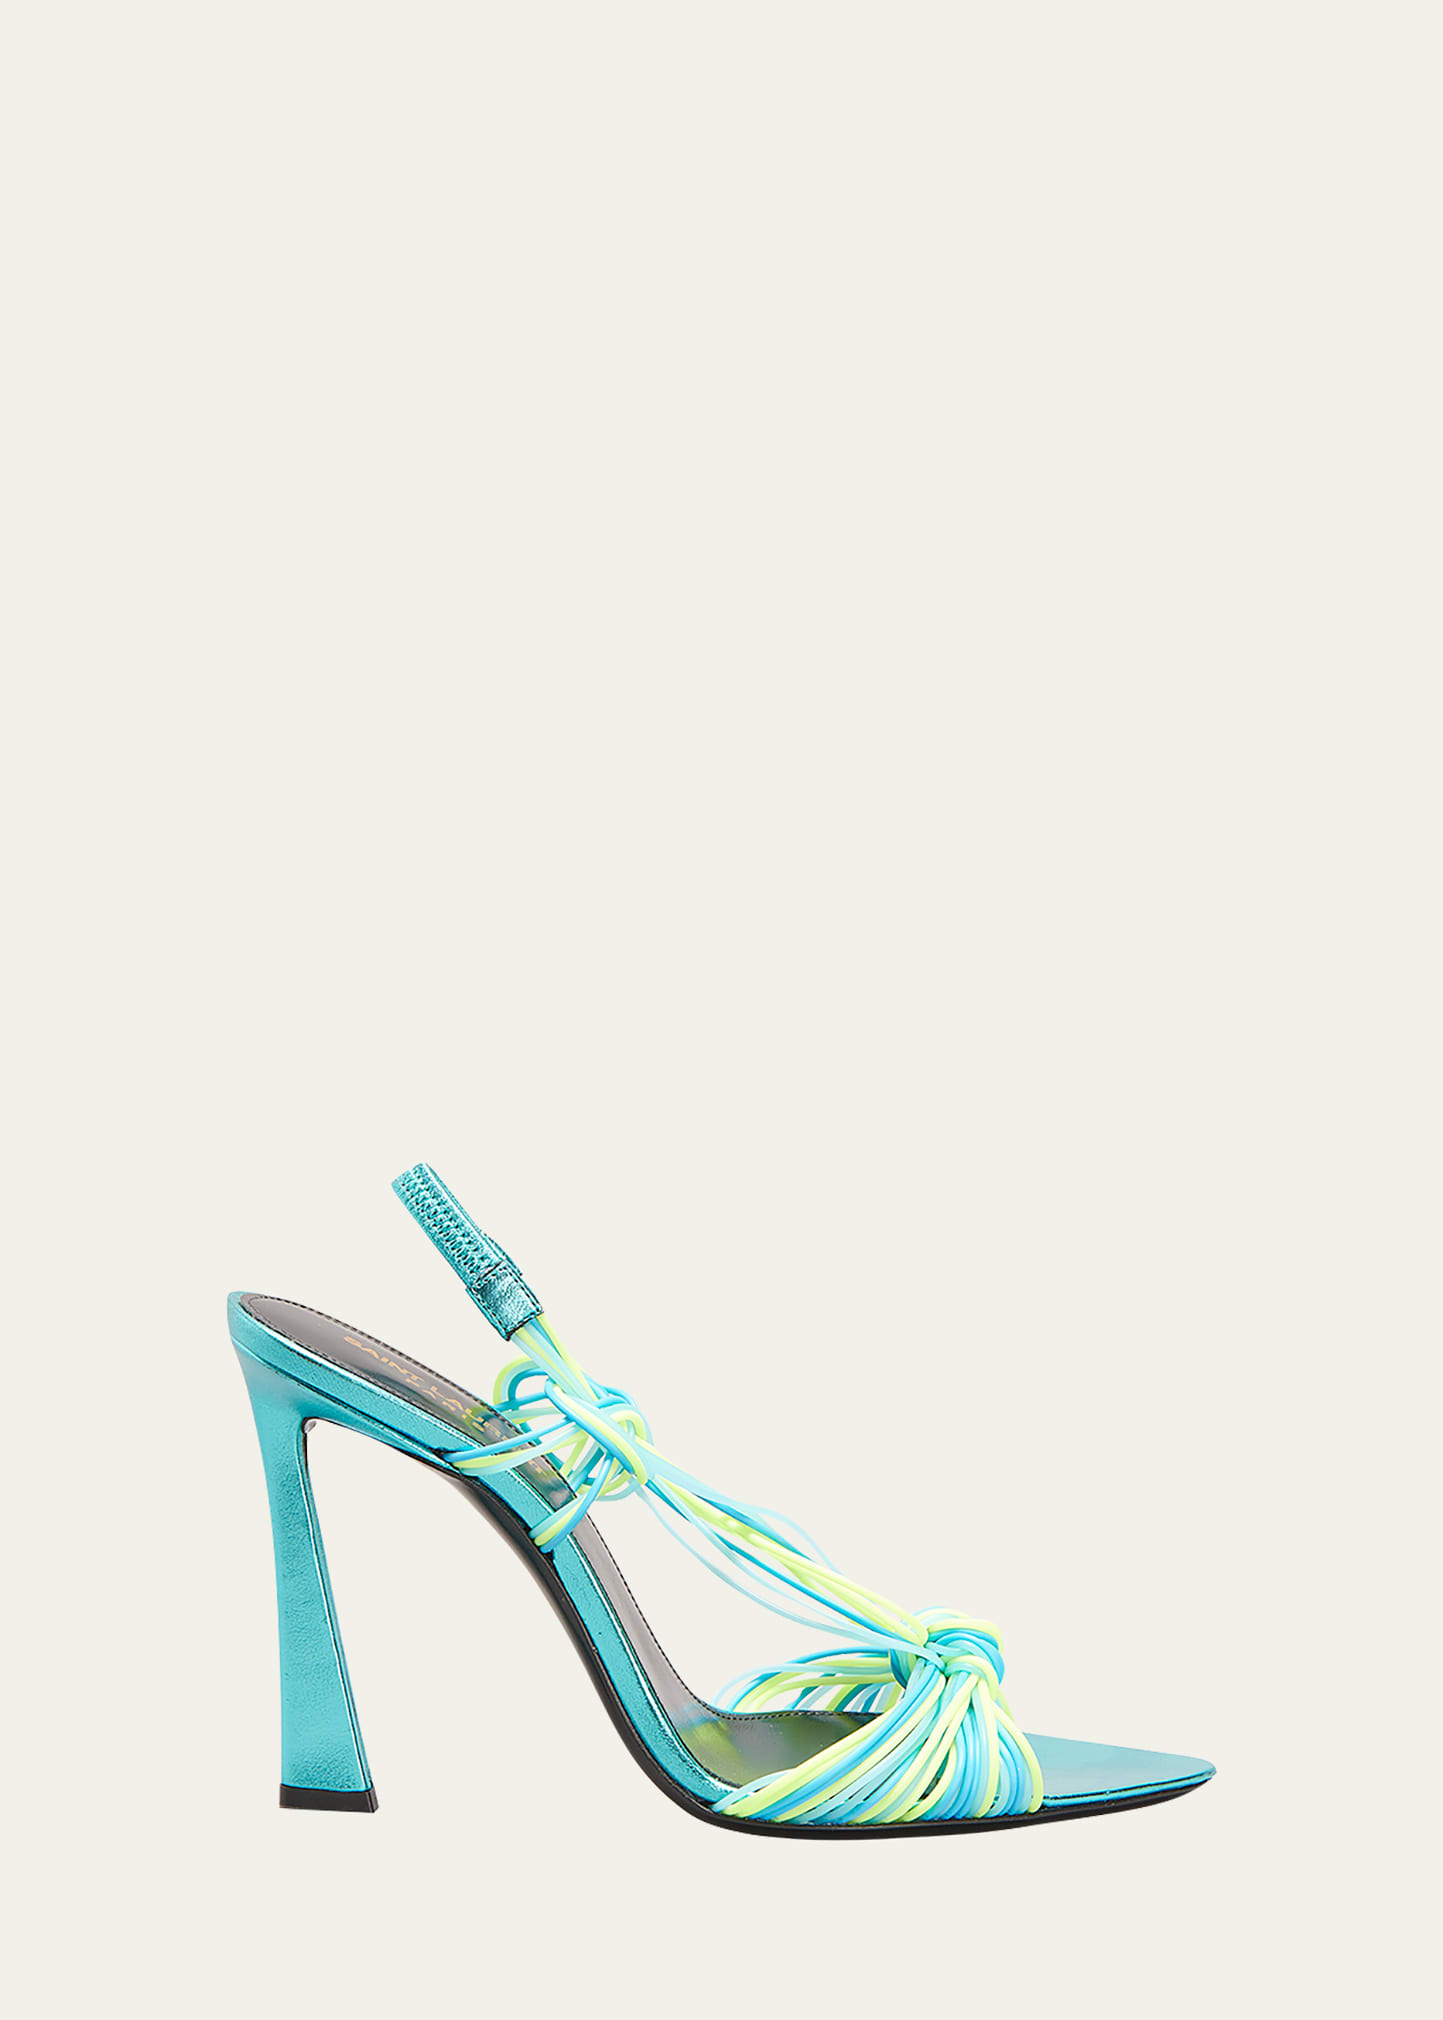 Saint Laurent Gippy Strappy Knot Slingback Sandals